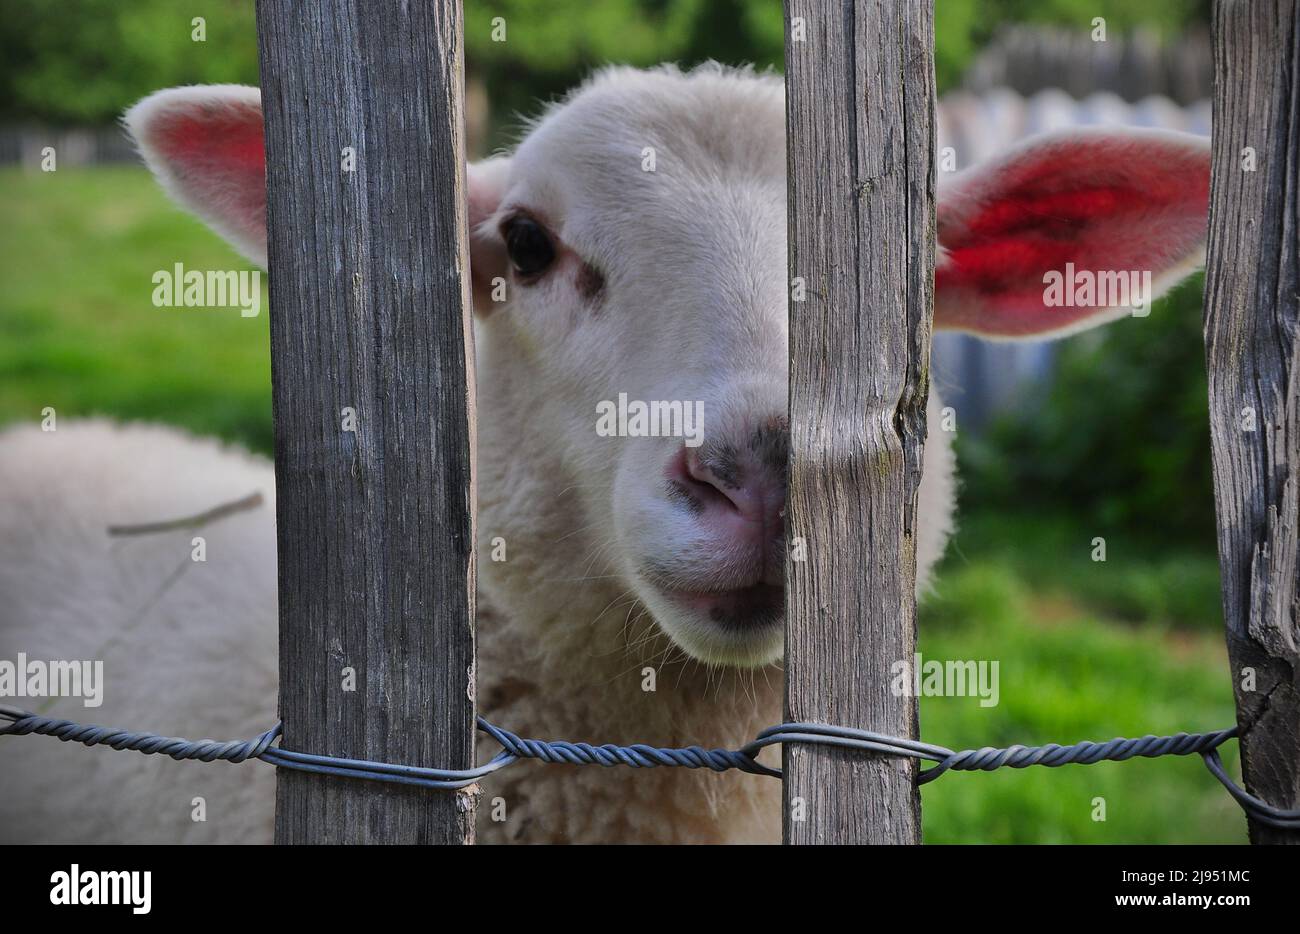 Curious lamb looking through an open fence, one eye and two ears are visible. Stock Photo